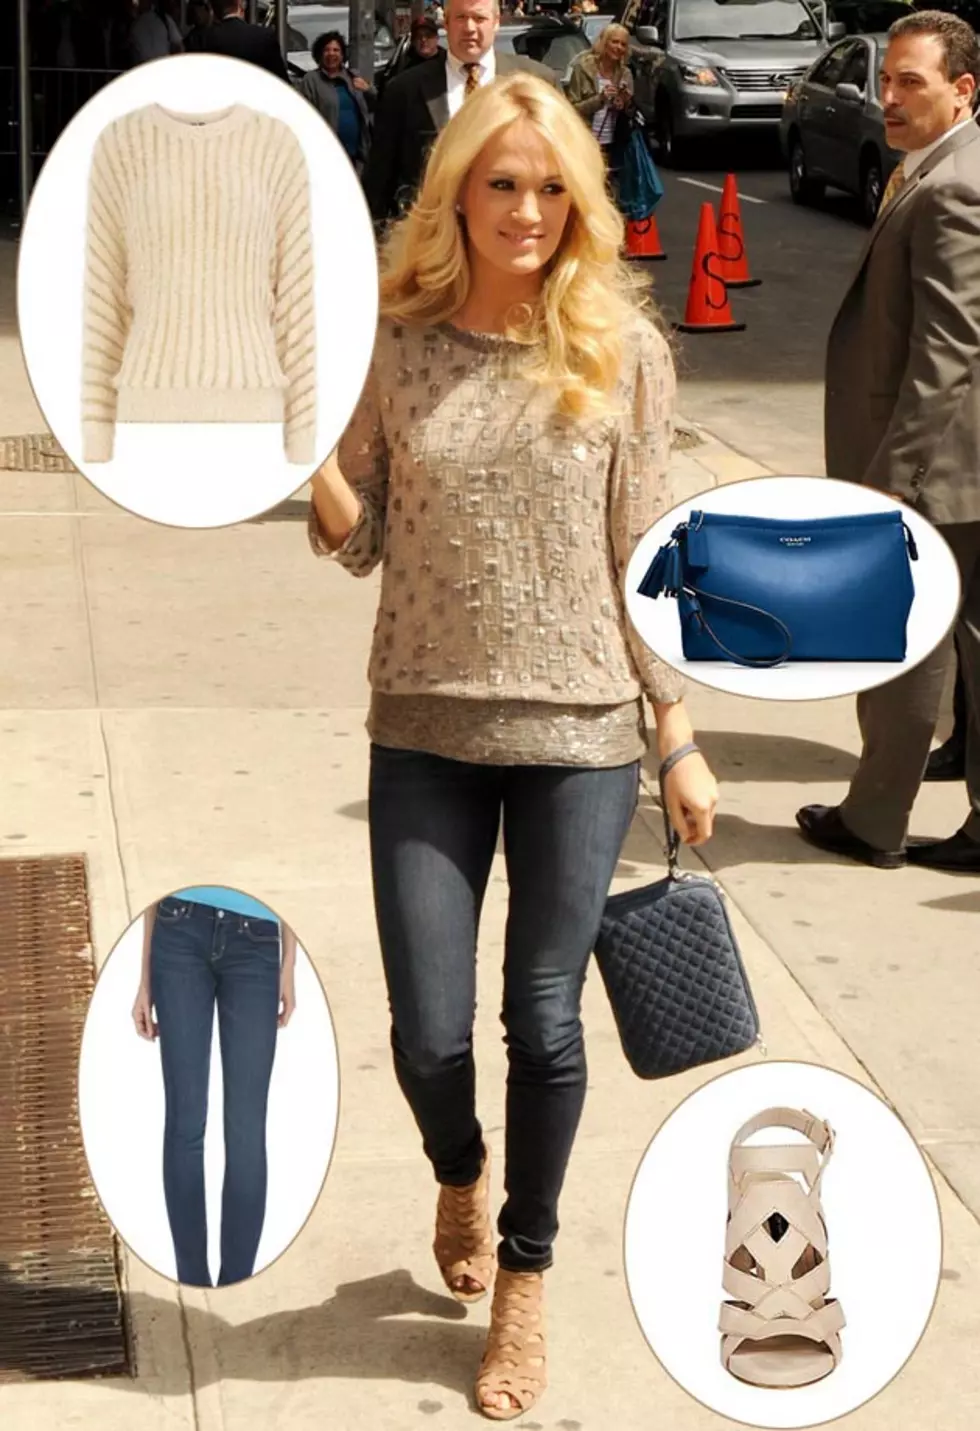 Carrie Underwood Shows You How to Get Ready for Spring in Skinny Jeans, a Fancy Sweater + More &#8211; Get the Look